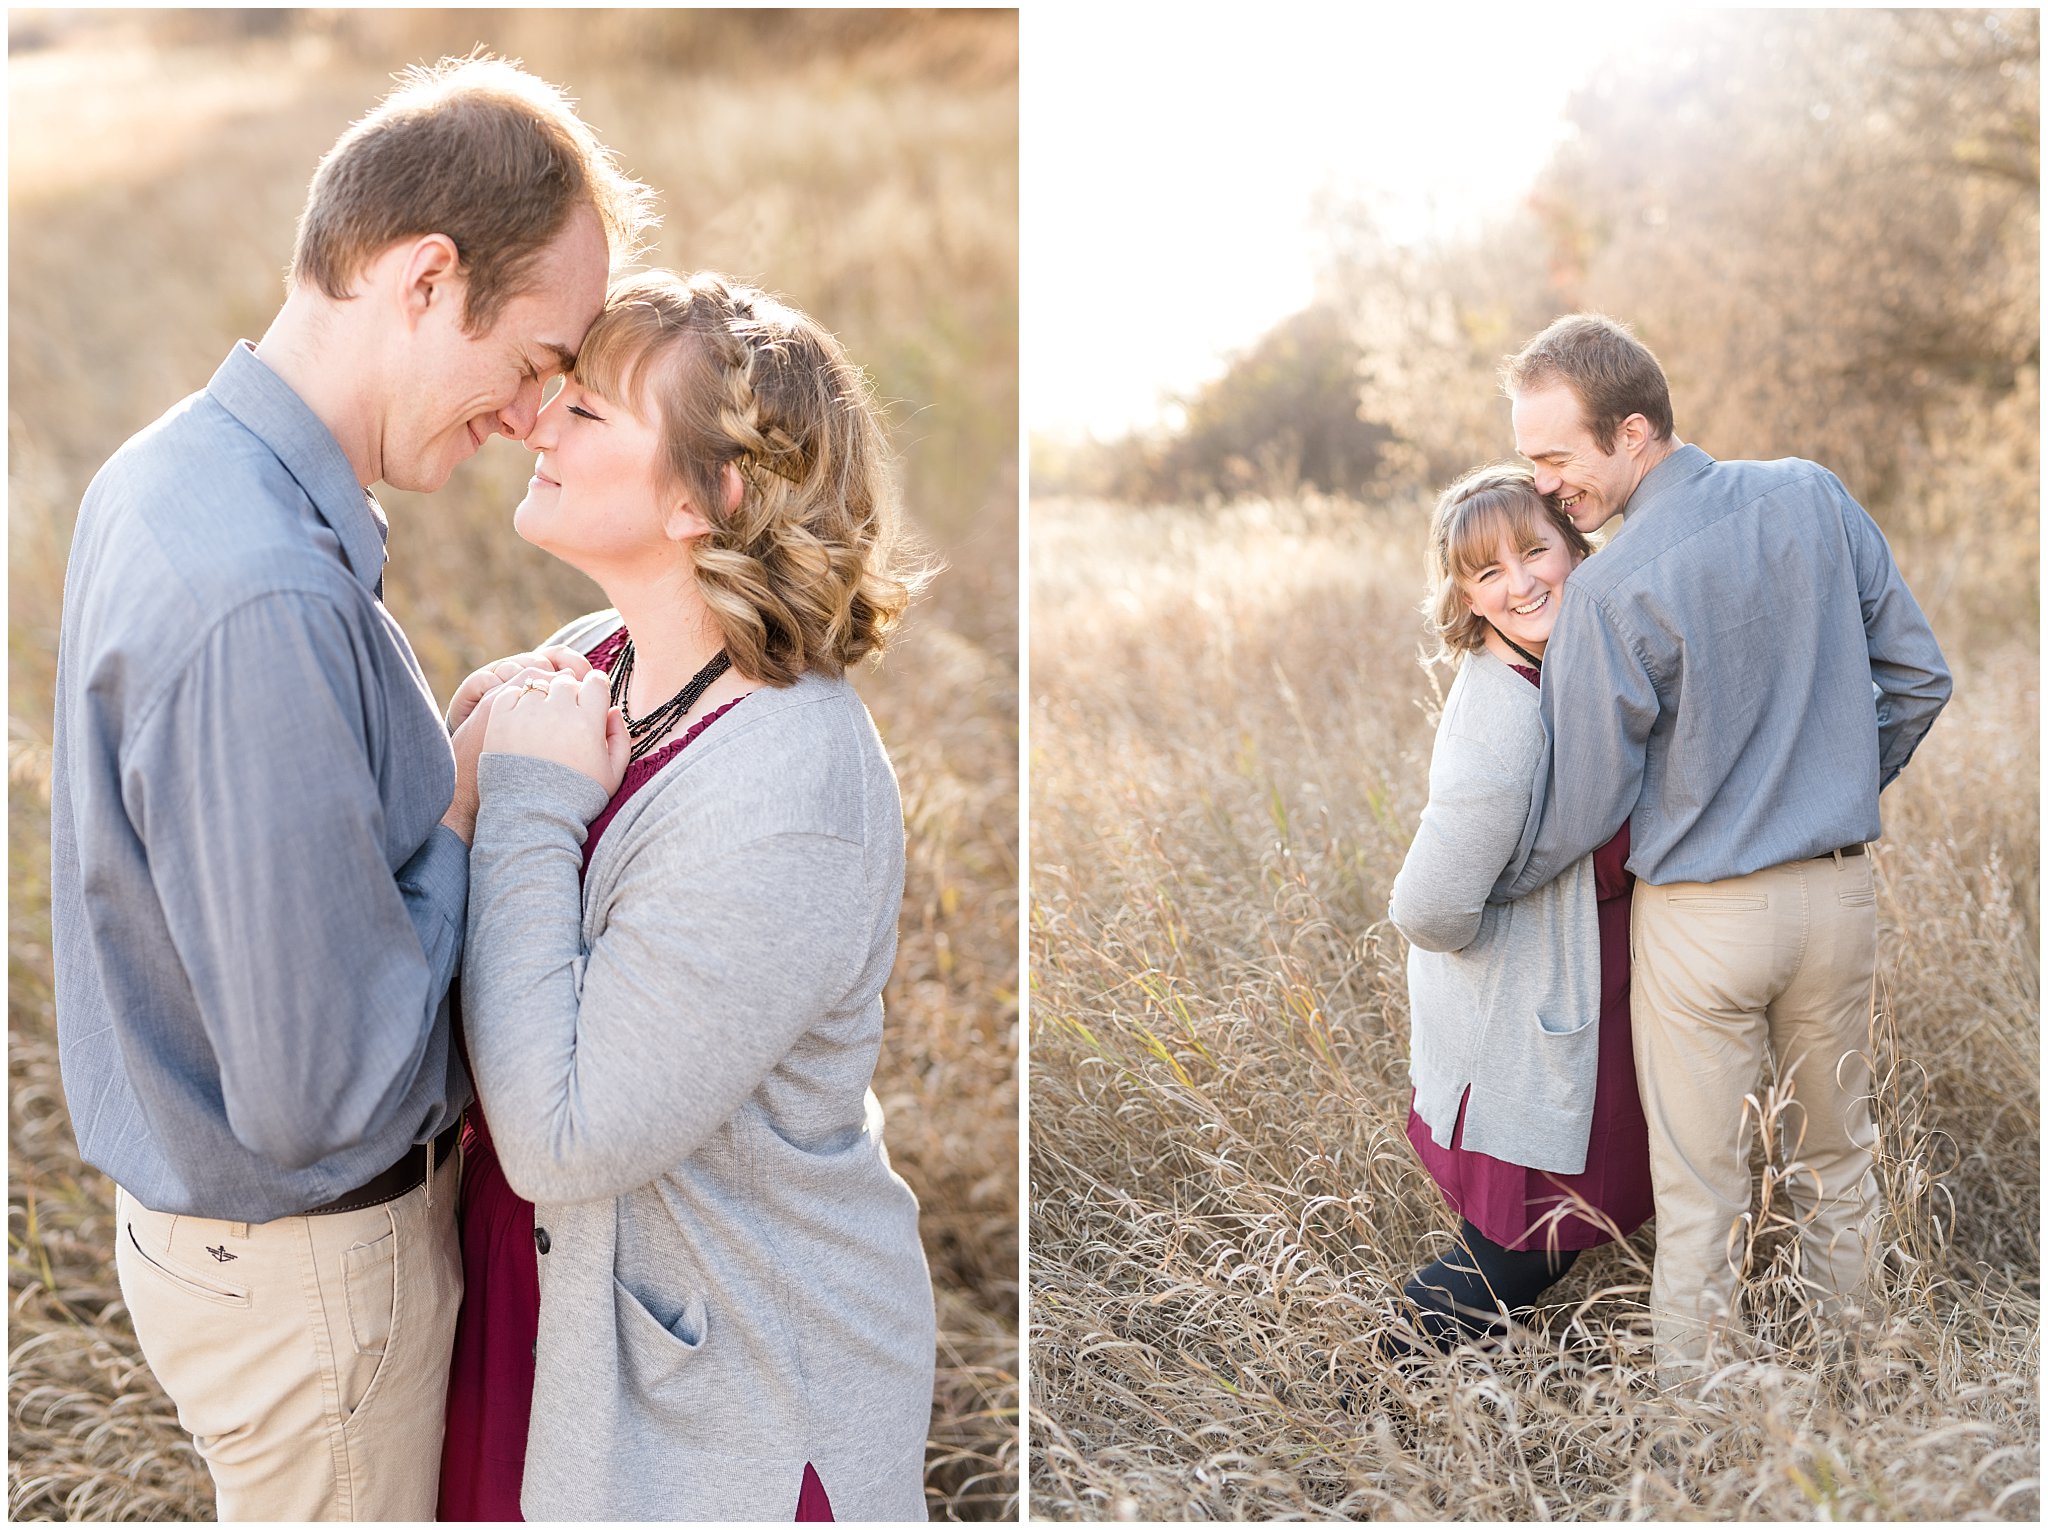 Couple in love in a field | Davis County Fall Engagement | Utah Wedding Photographers | Jessie and Dallin